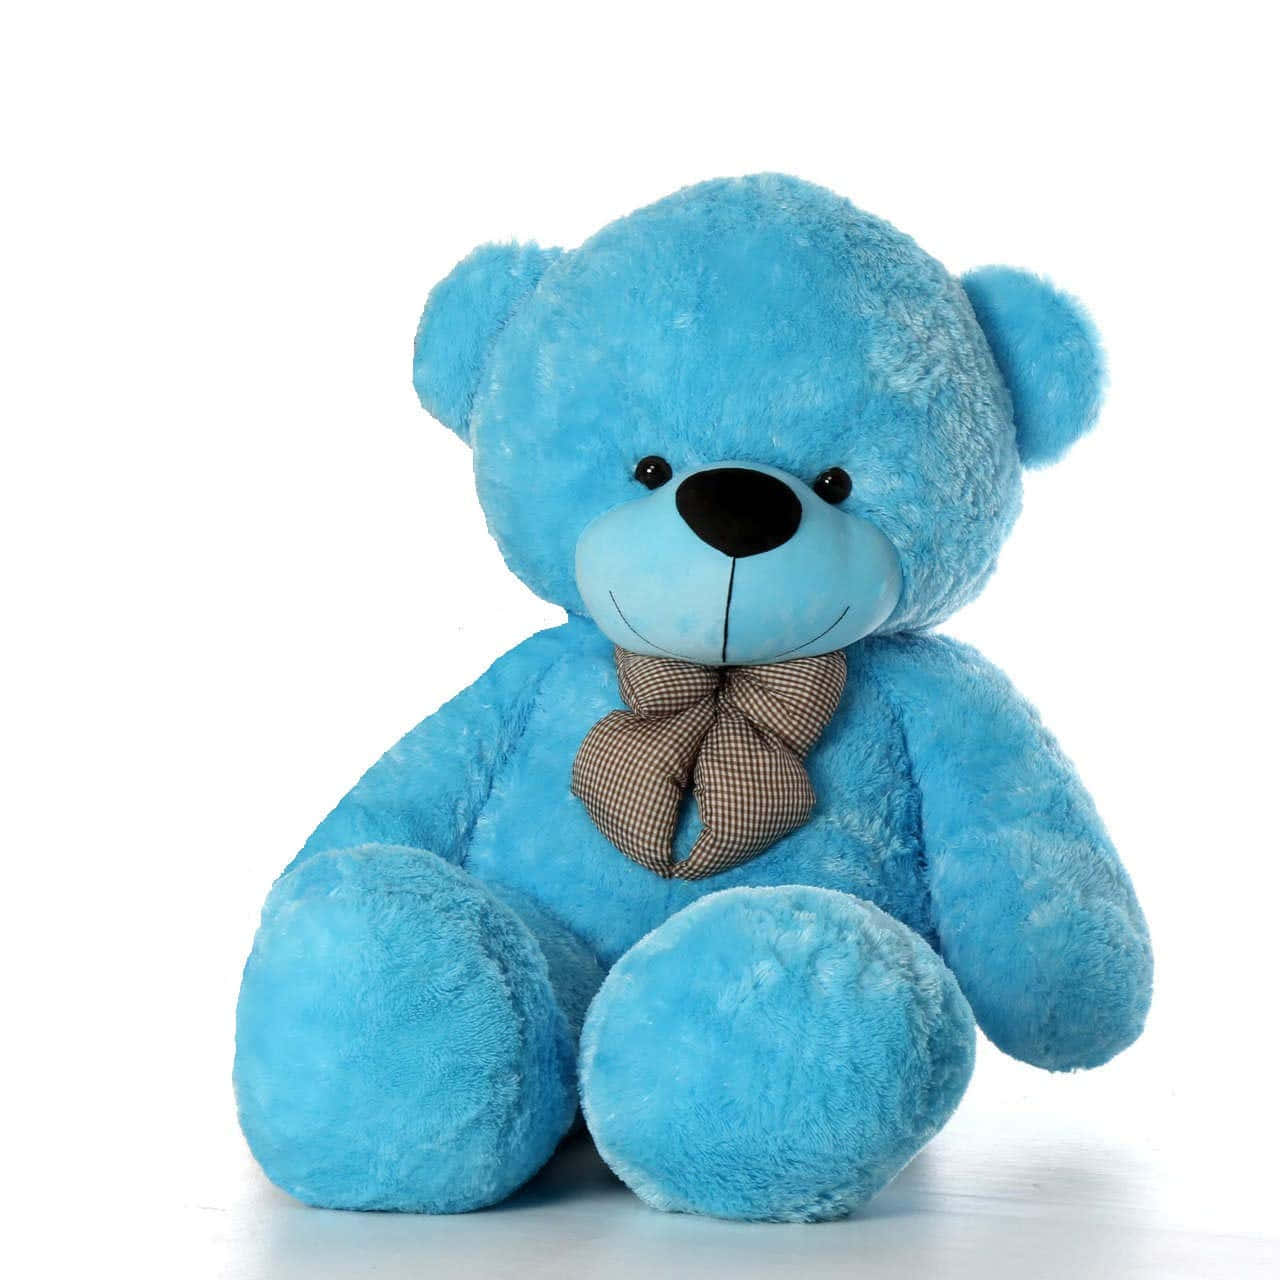 Find a cuddly and comforting companion with this beloved teddy bear!